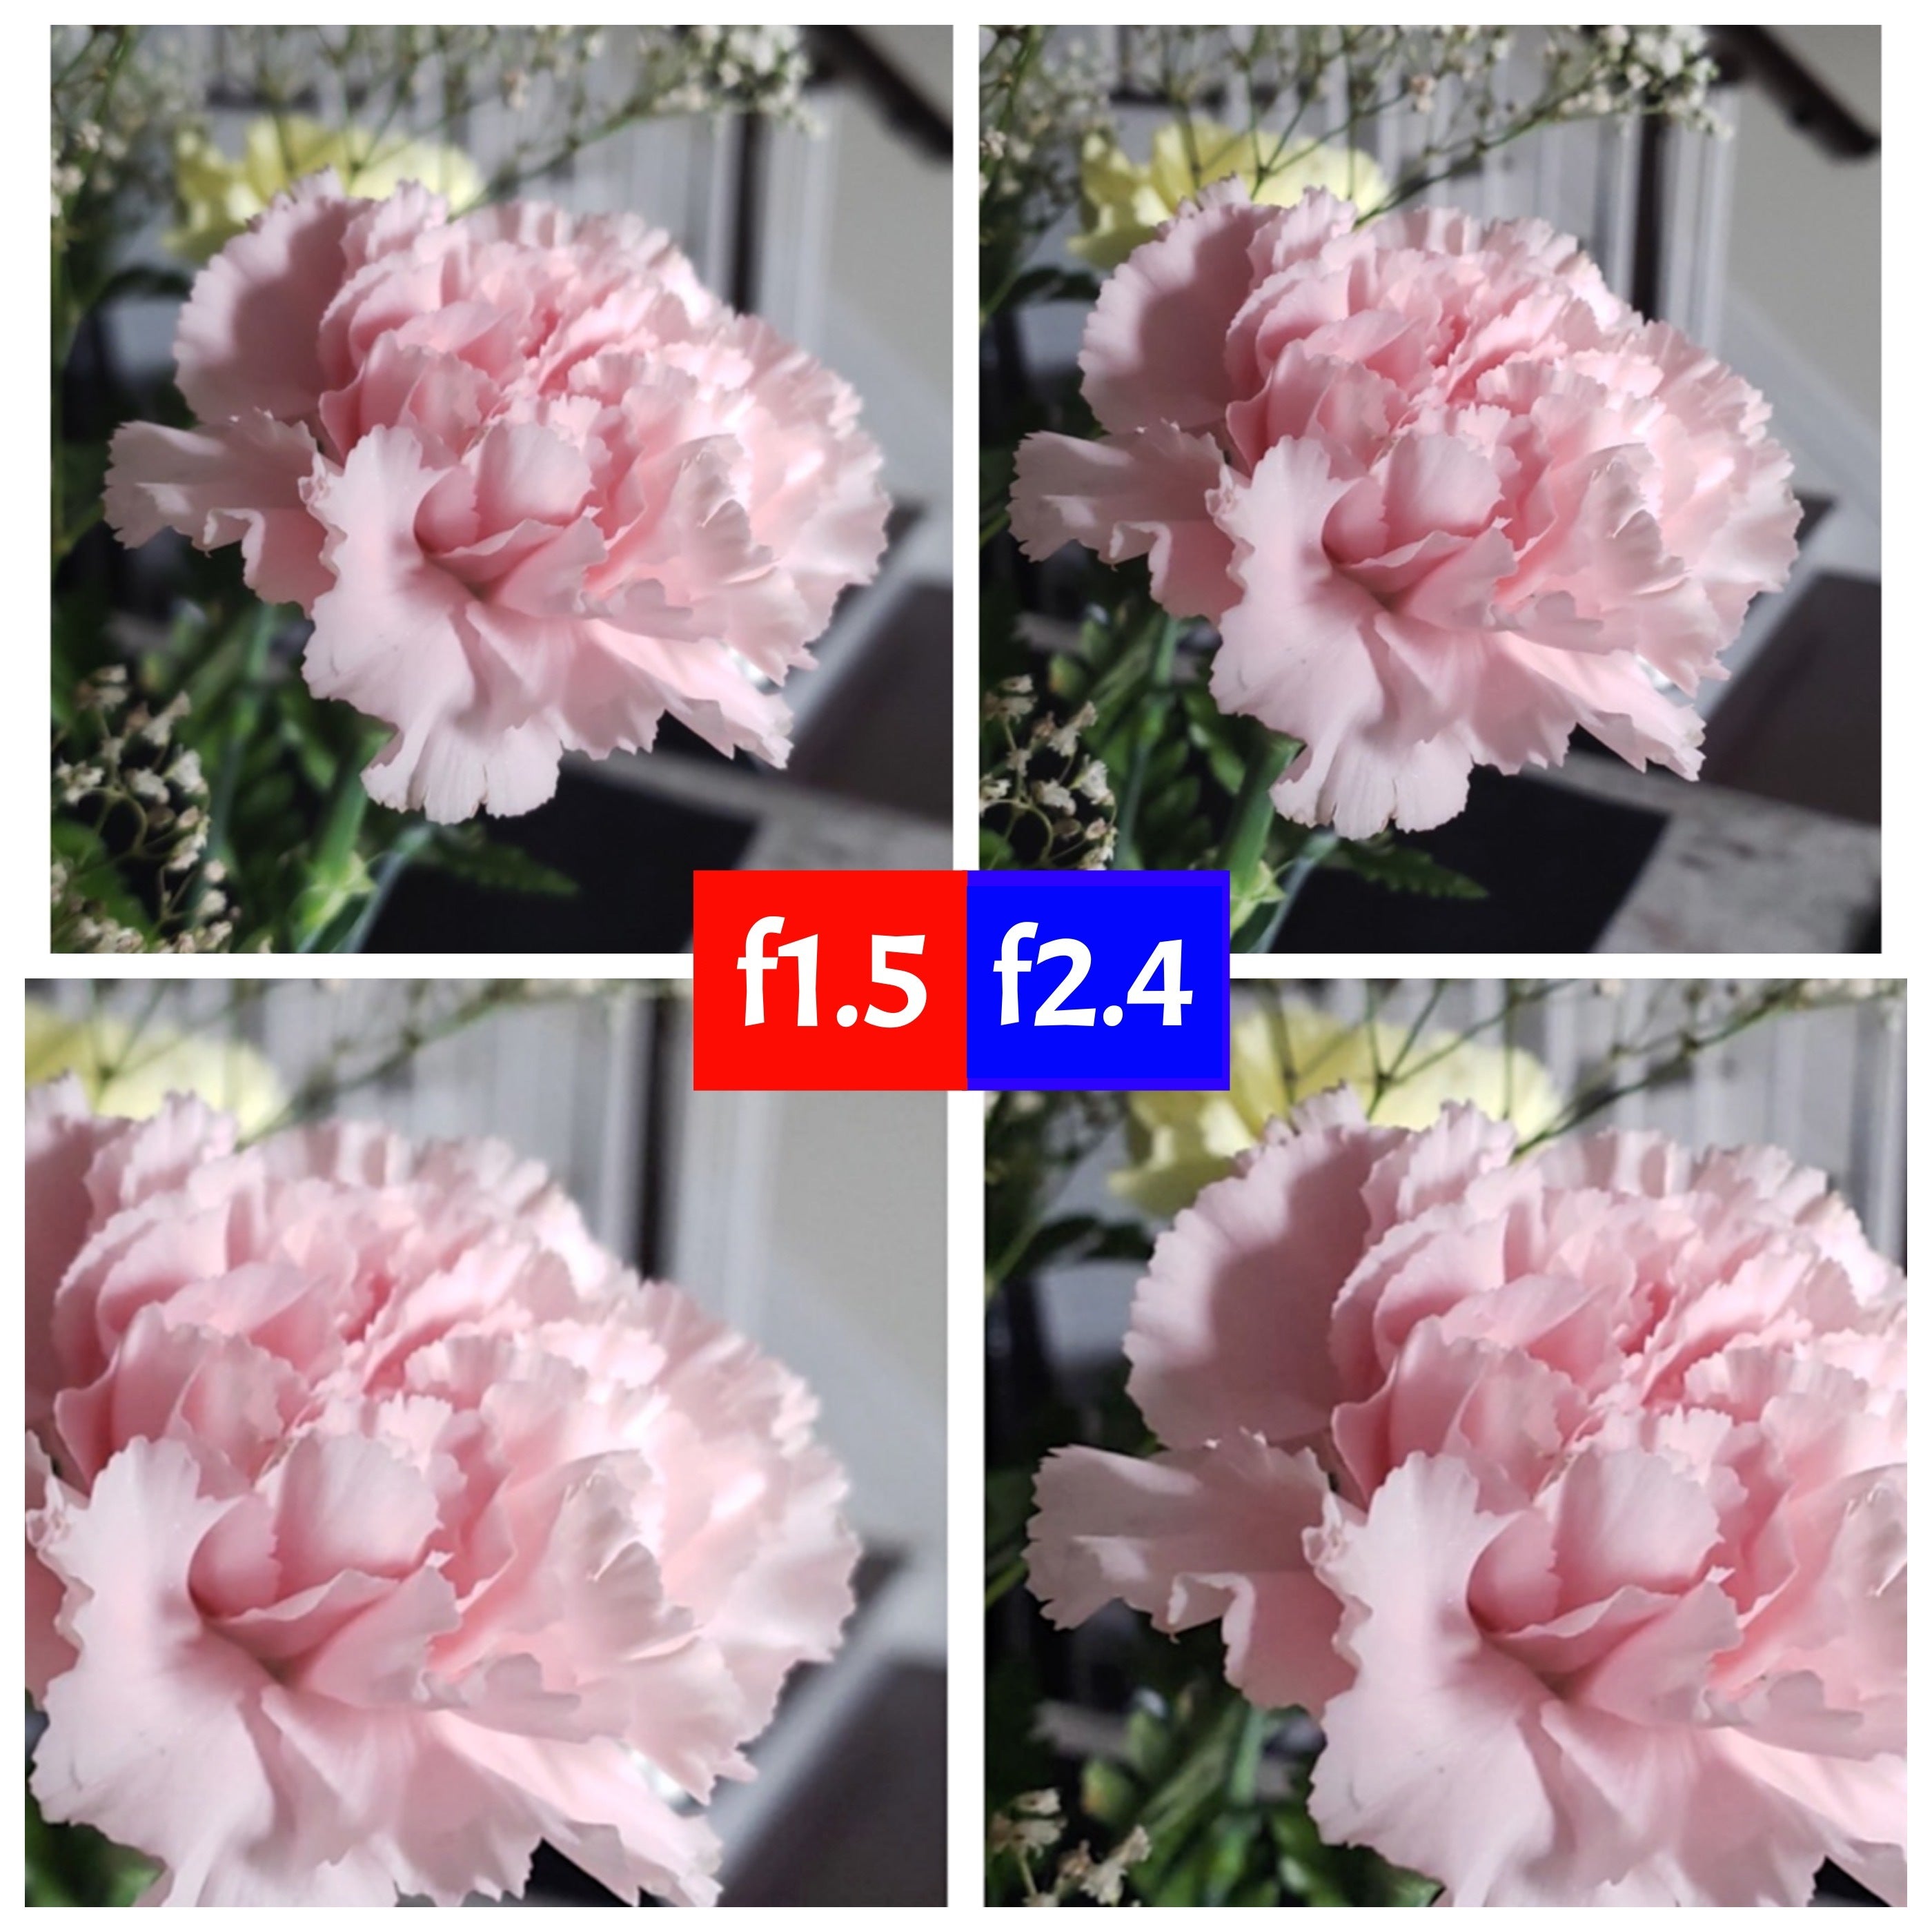 f2.4 versus f1.5 - notice how on the left the edges of the flower are out of focus and fuzzy, while on the right we get better subject focus. Photo by Marques Brownlee. - The negative effect of large camera sensors on new smartphones: The solution might be in the Galaxy... S9